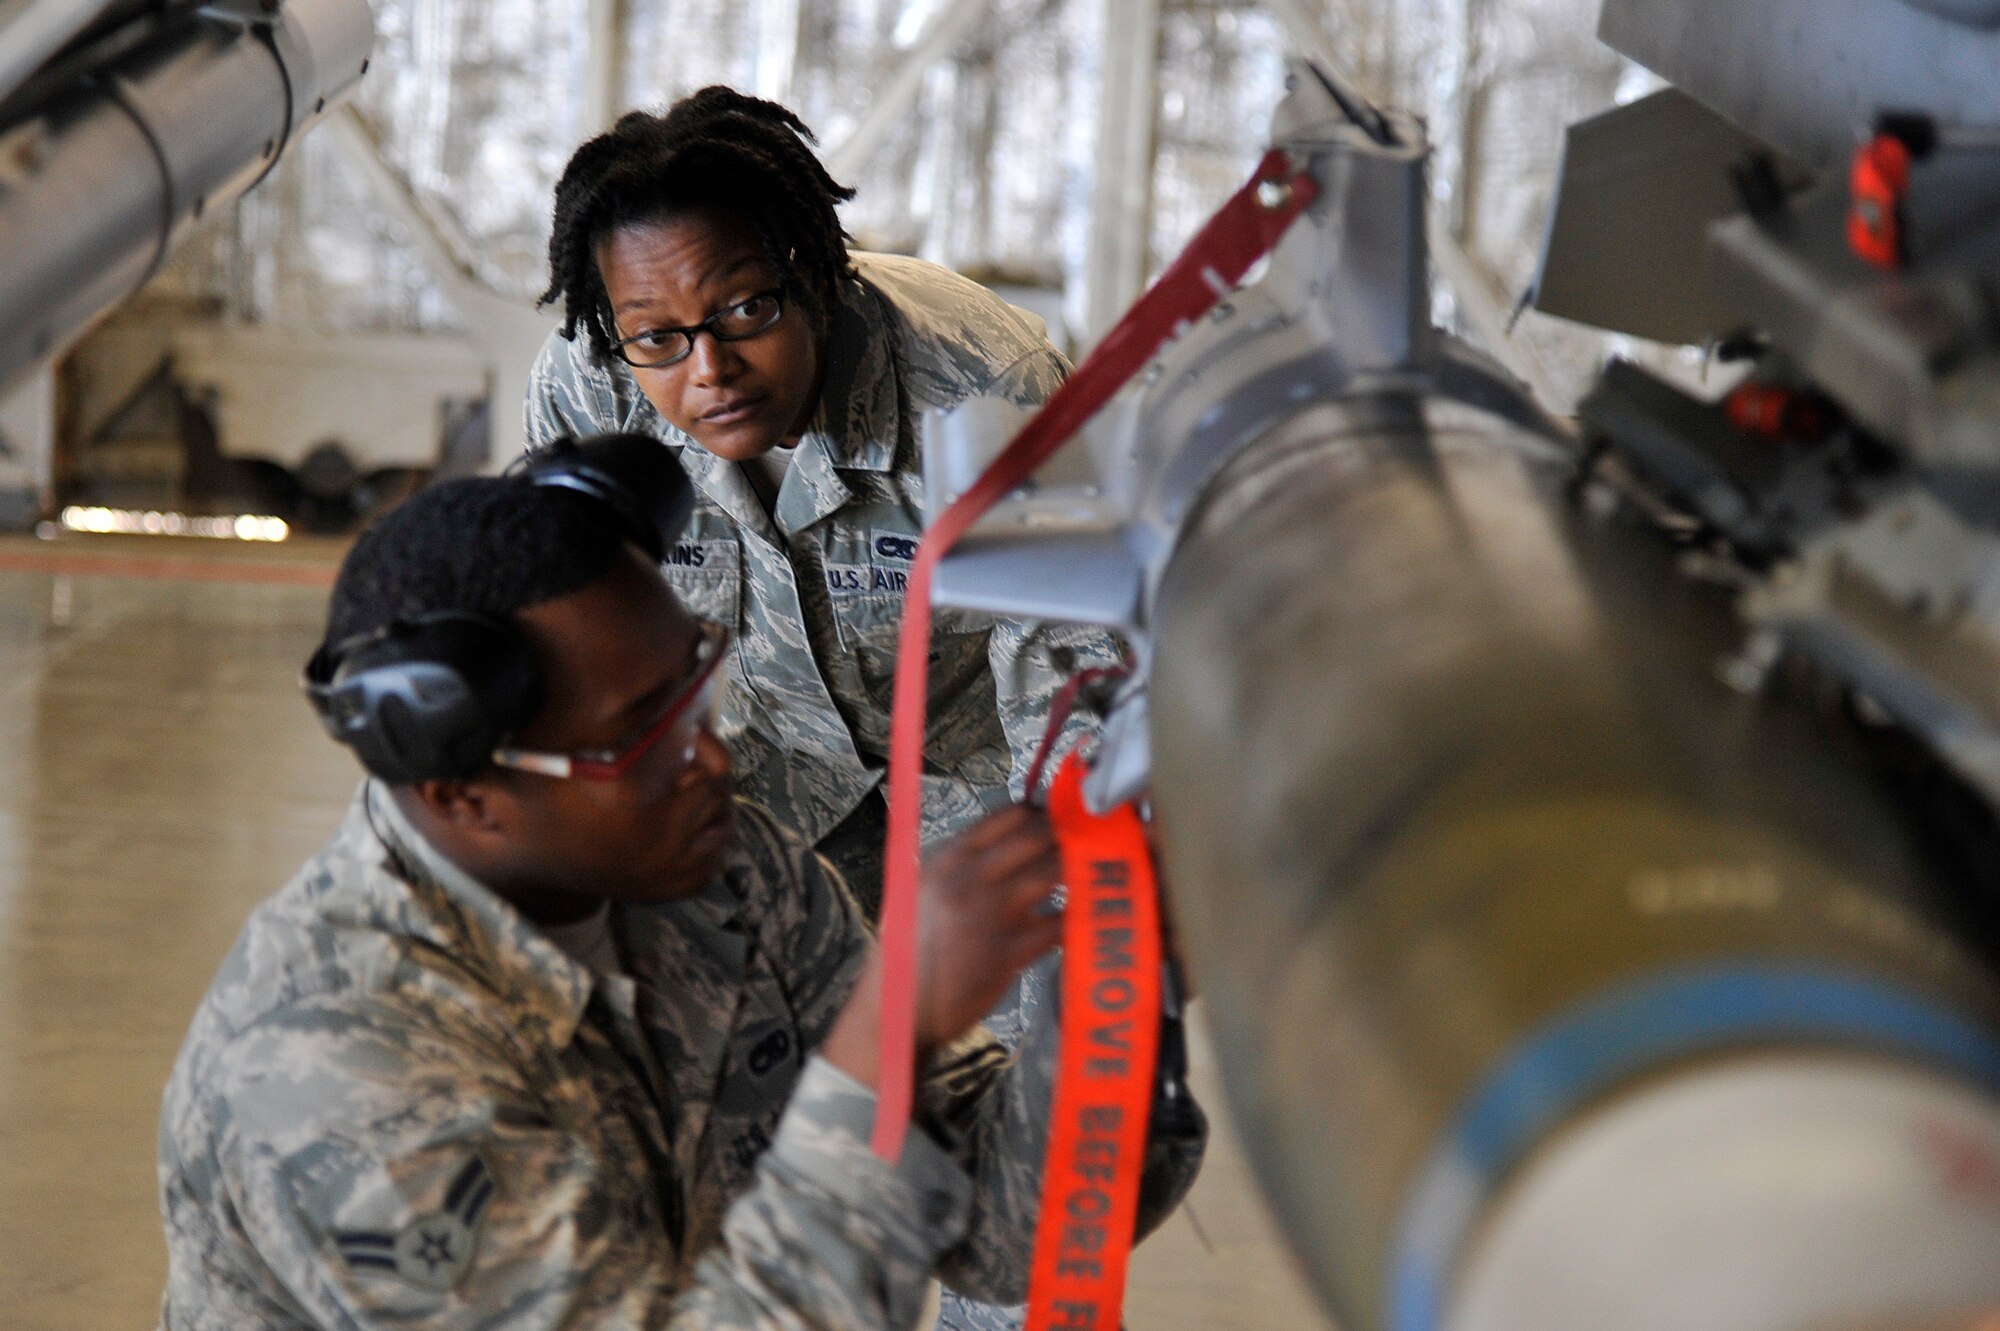 U.S. Air force Senior Airman Kayla Hopkins, 35th Maintenance Group weapons load crew evaluator, inspects an Airman installing an armament onto an F-16 Fighting Falcon at Misawa Air Base, Japan, Mar. 26, 2015. During Hopkins’ evaluation process, she hand-checks for any discrepancies where each armament was loaded. (U.S. Air Force photo by Airman 1st Class Patrick S. Ciccarone/Released)